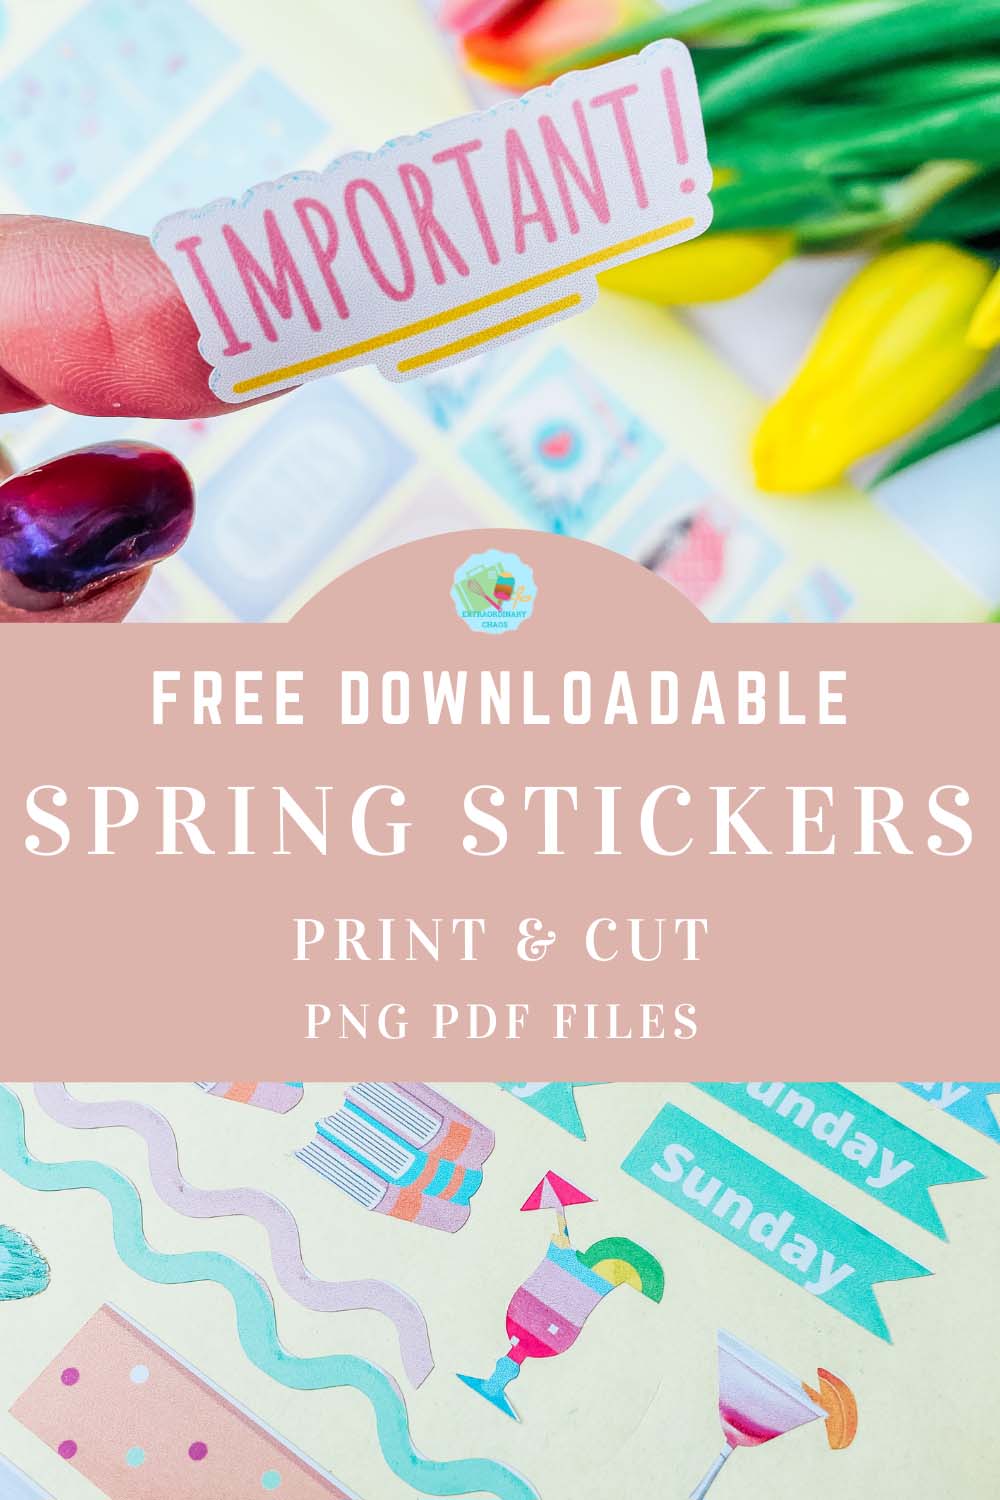 Free downloadable spring stickers to print and cut of cut out by hand